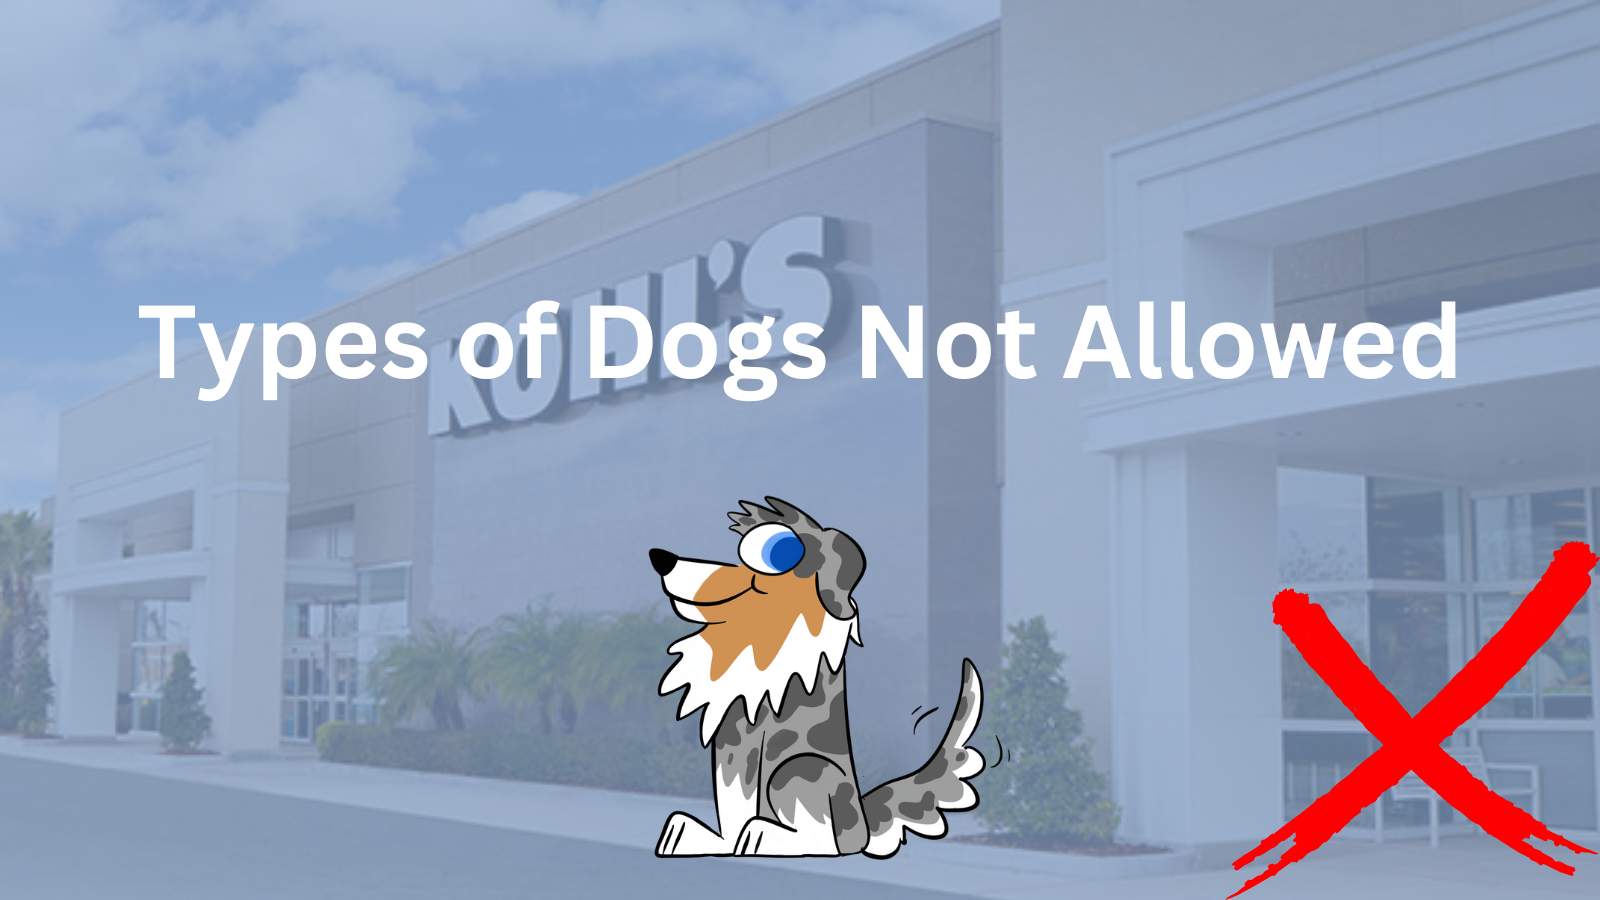 Image Text: "Types of Dogs Not Allowed"